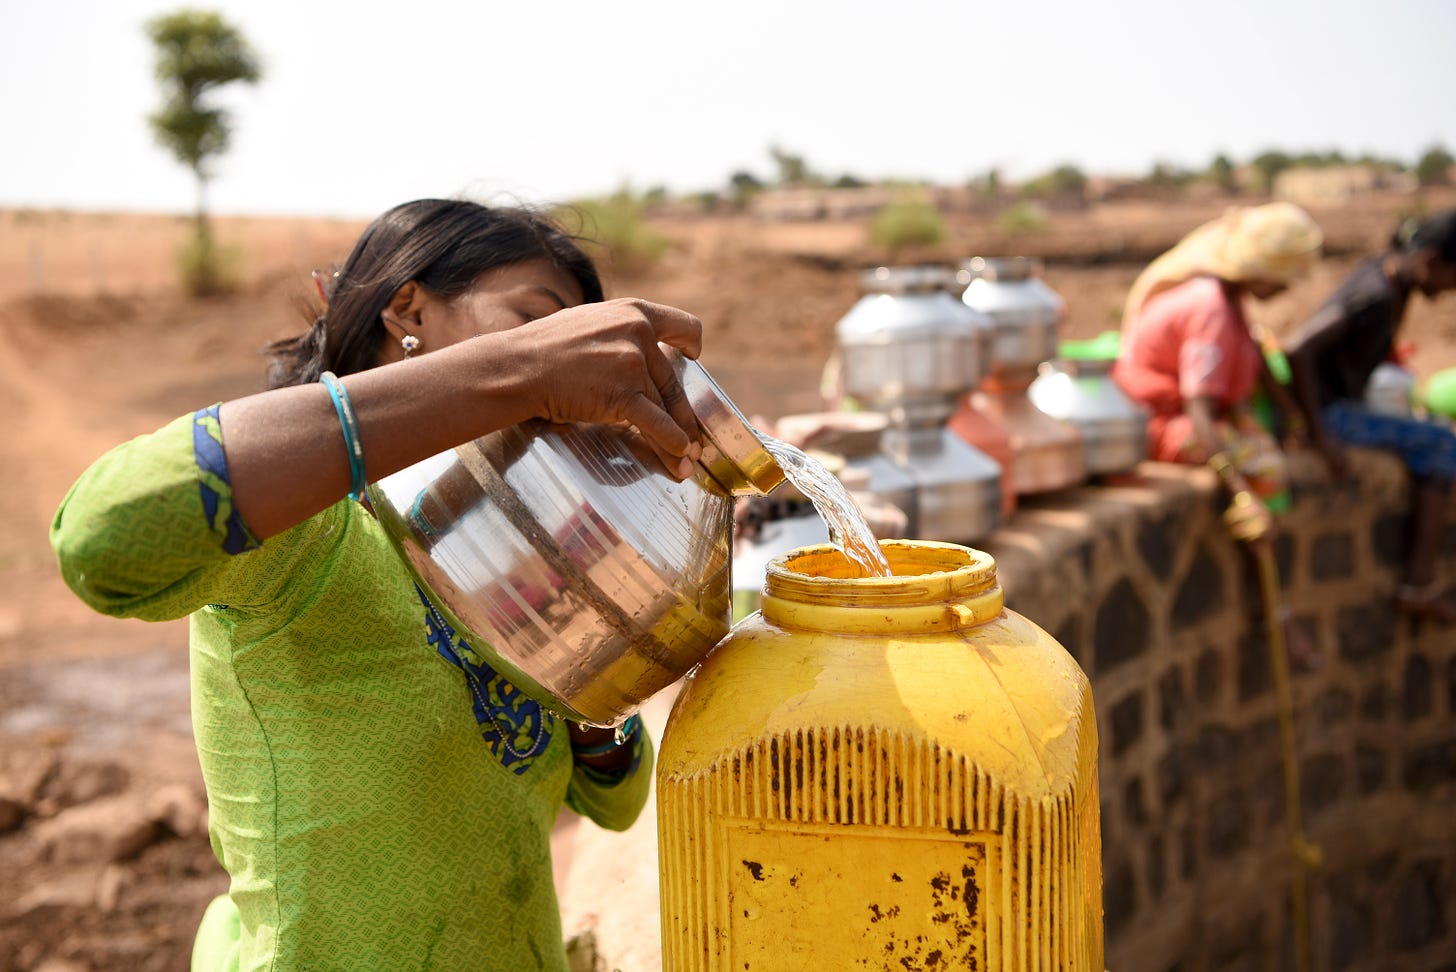 A woman in a green dress pours water from a silver pot into a yellow plastic container. Her arm and the pot obscure her face.